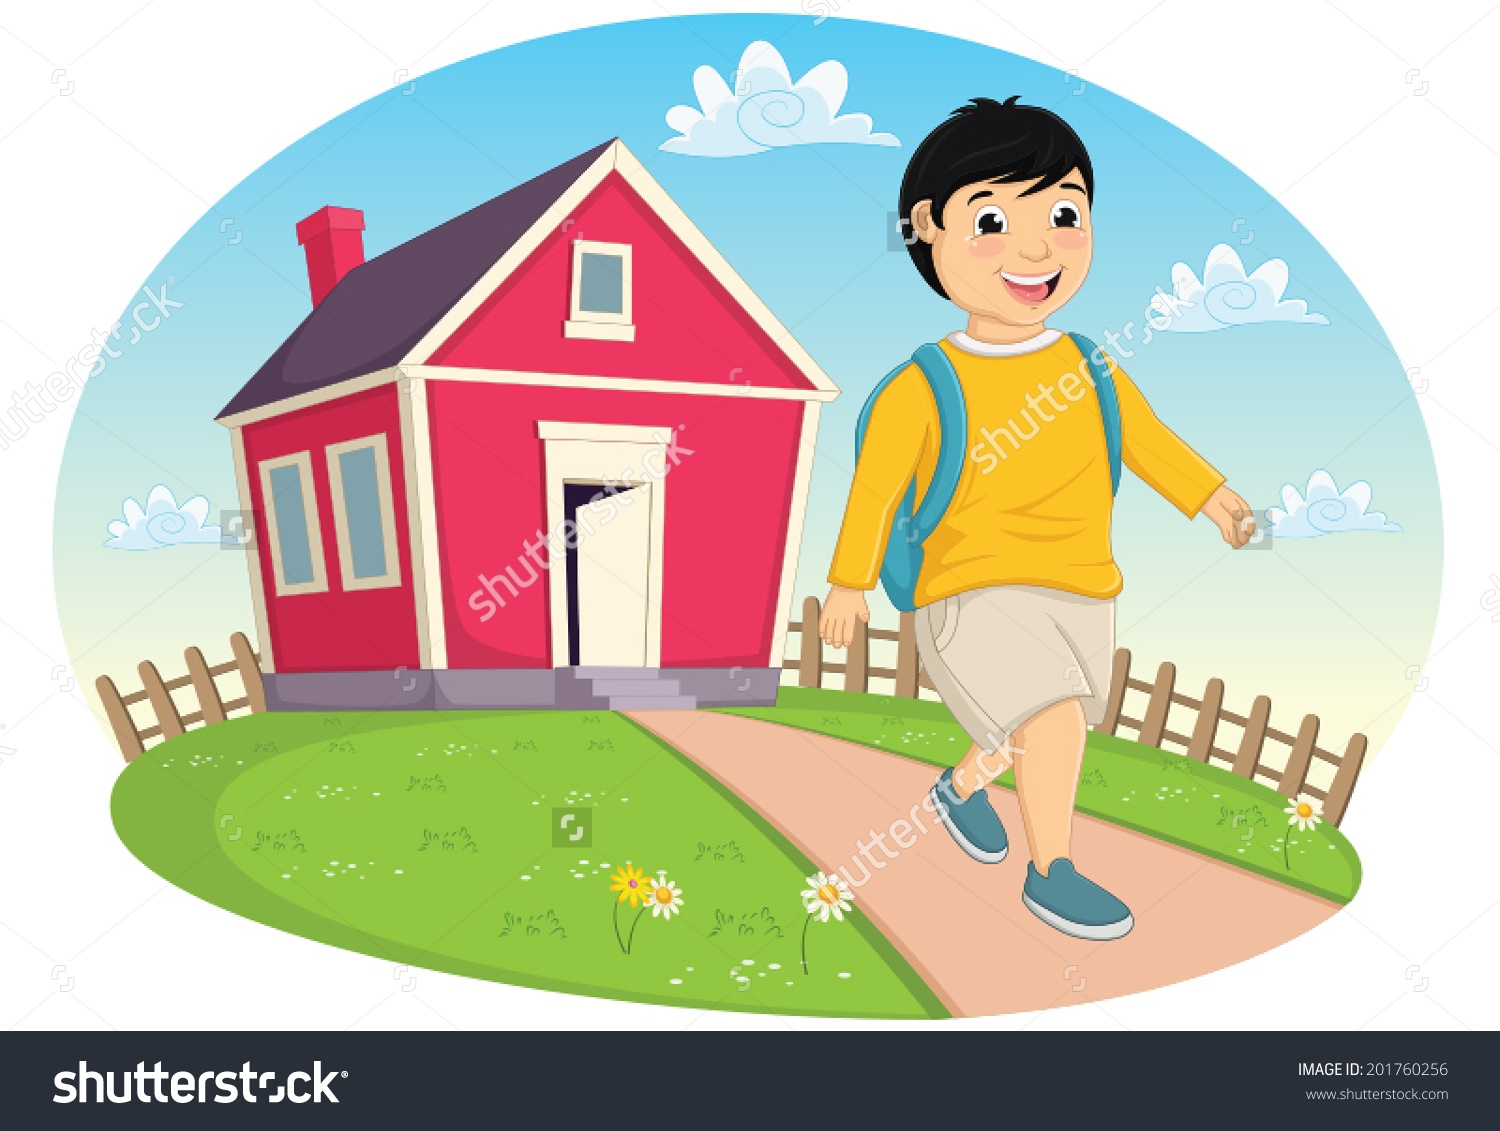 Leaving The House Clipart.